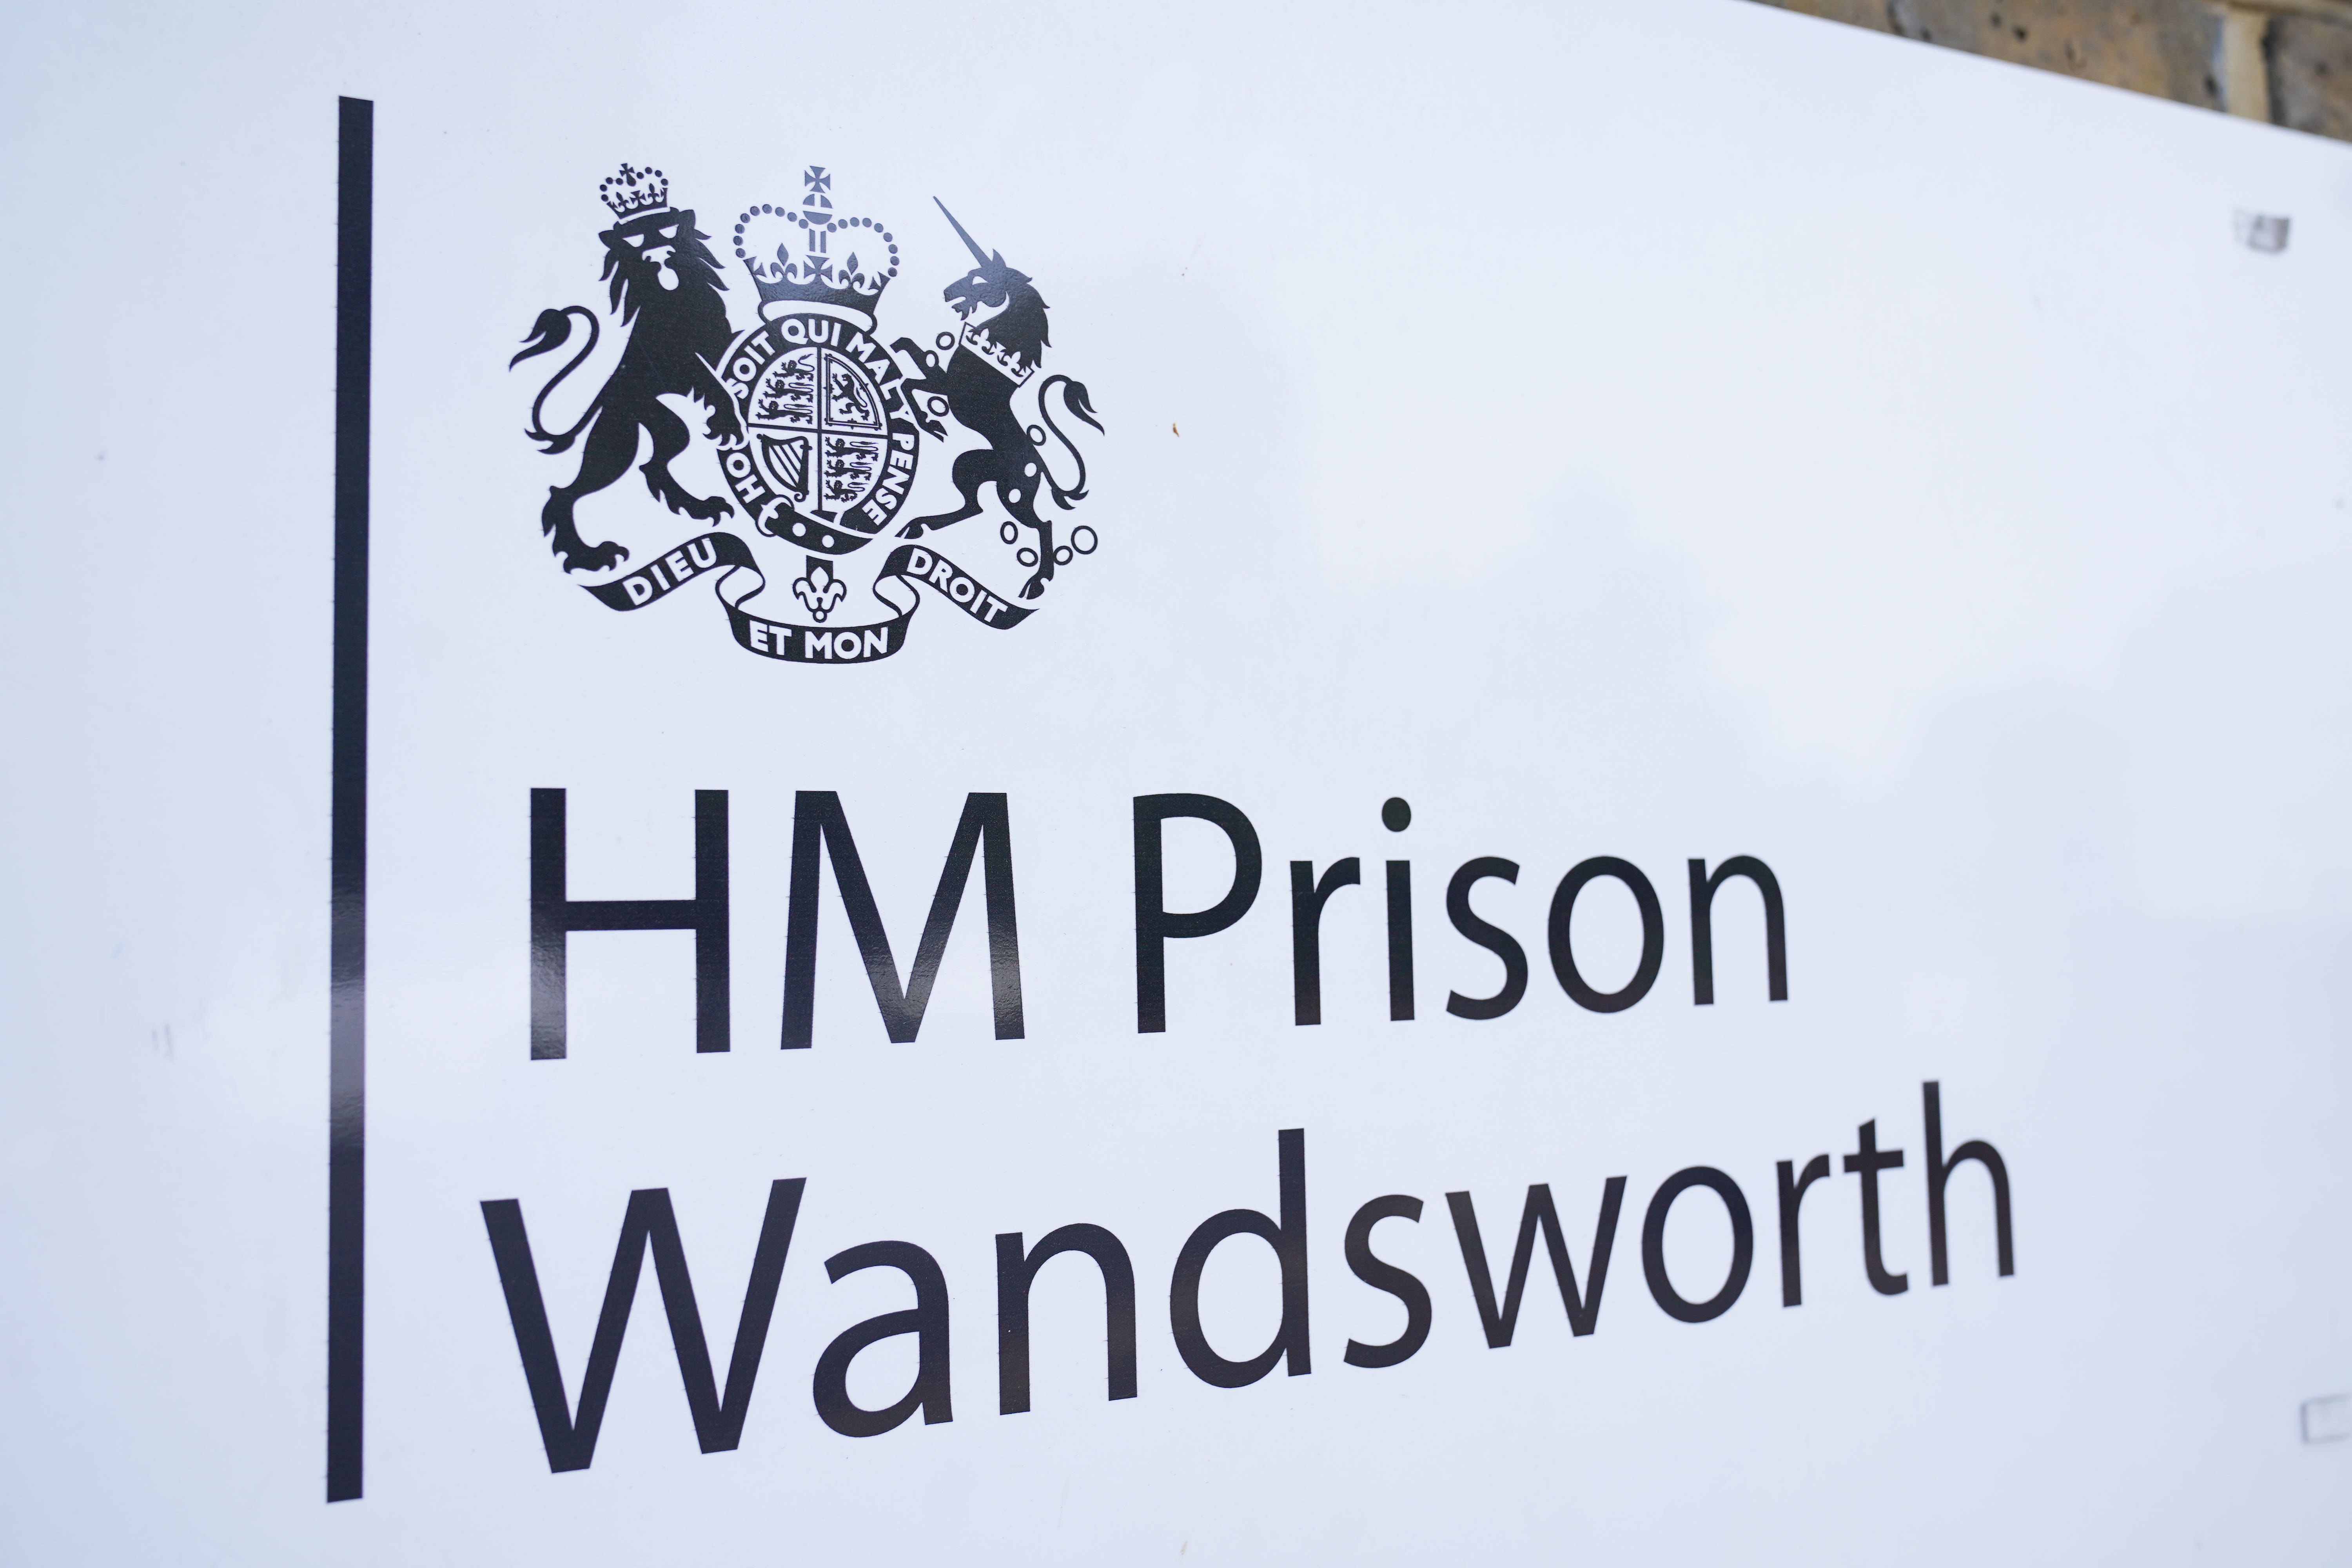 The footage was reportedly filmed inside the scandal-hit Wandsworth Prison